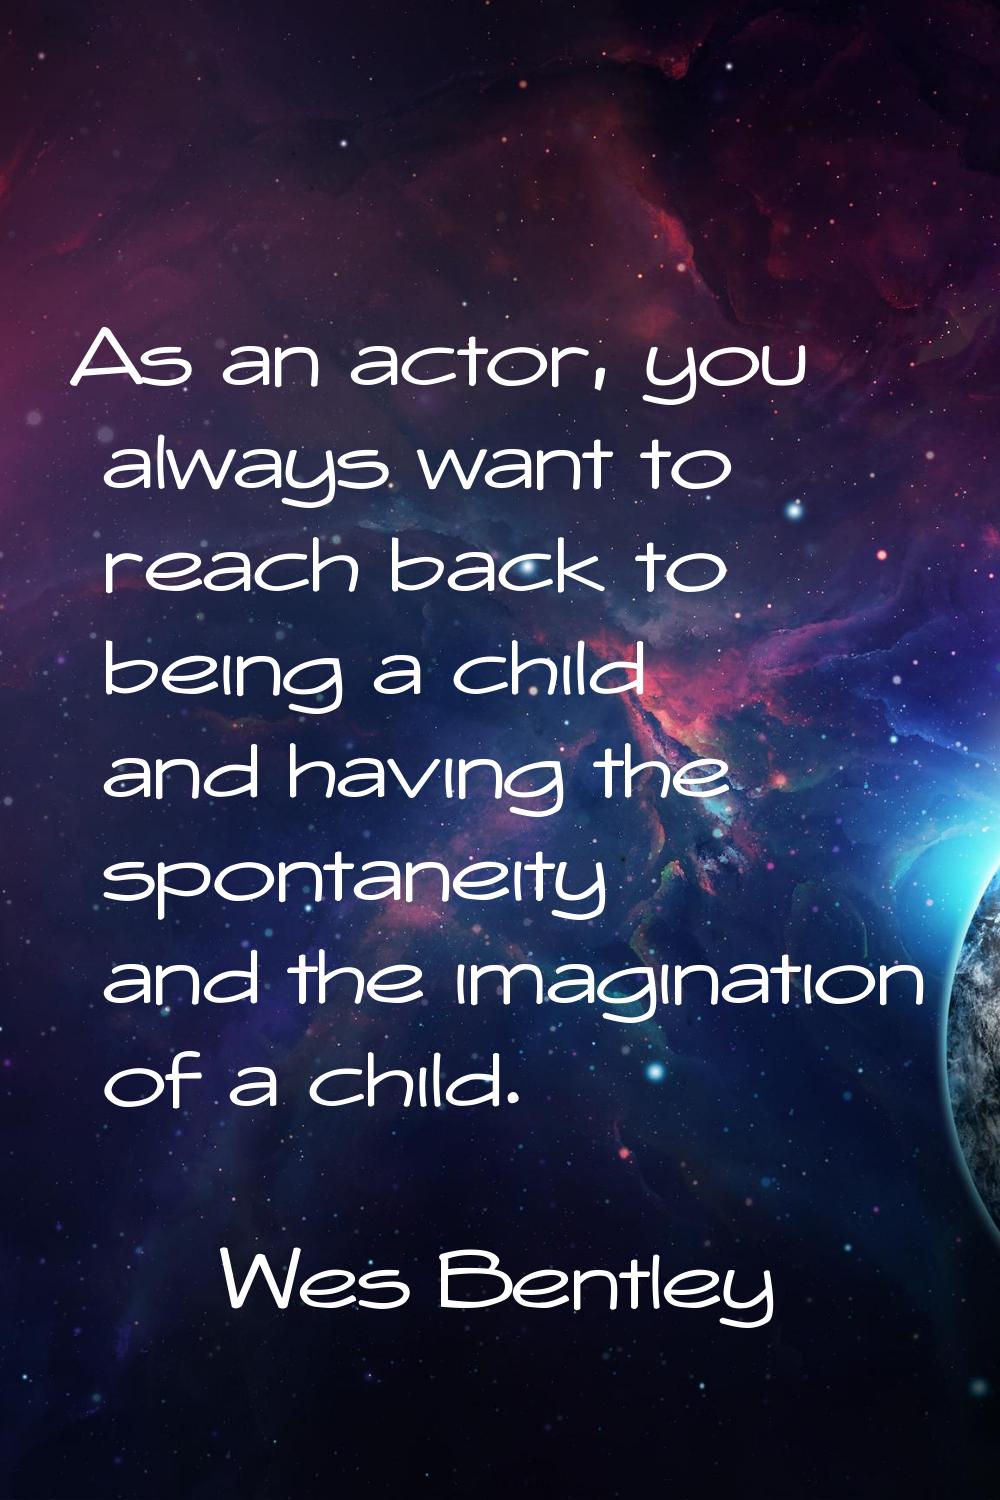 As an actor, you always want to reach back to being a child and having the spontaneity and the imag